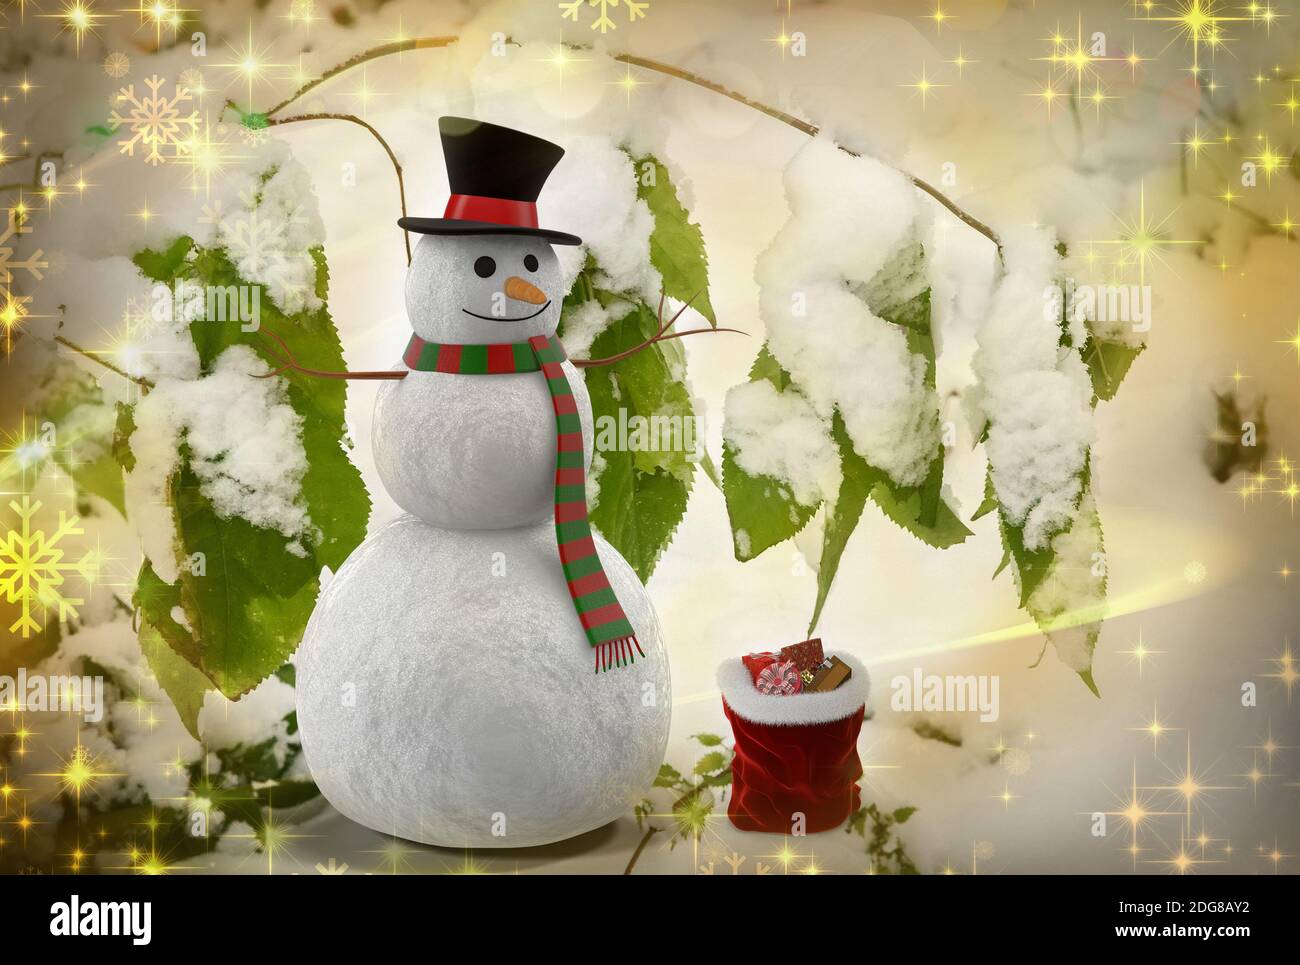 Christmas story : snowman with gifts . Stock Photo